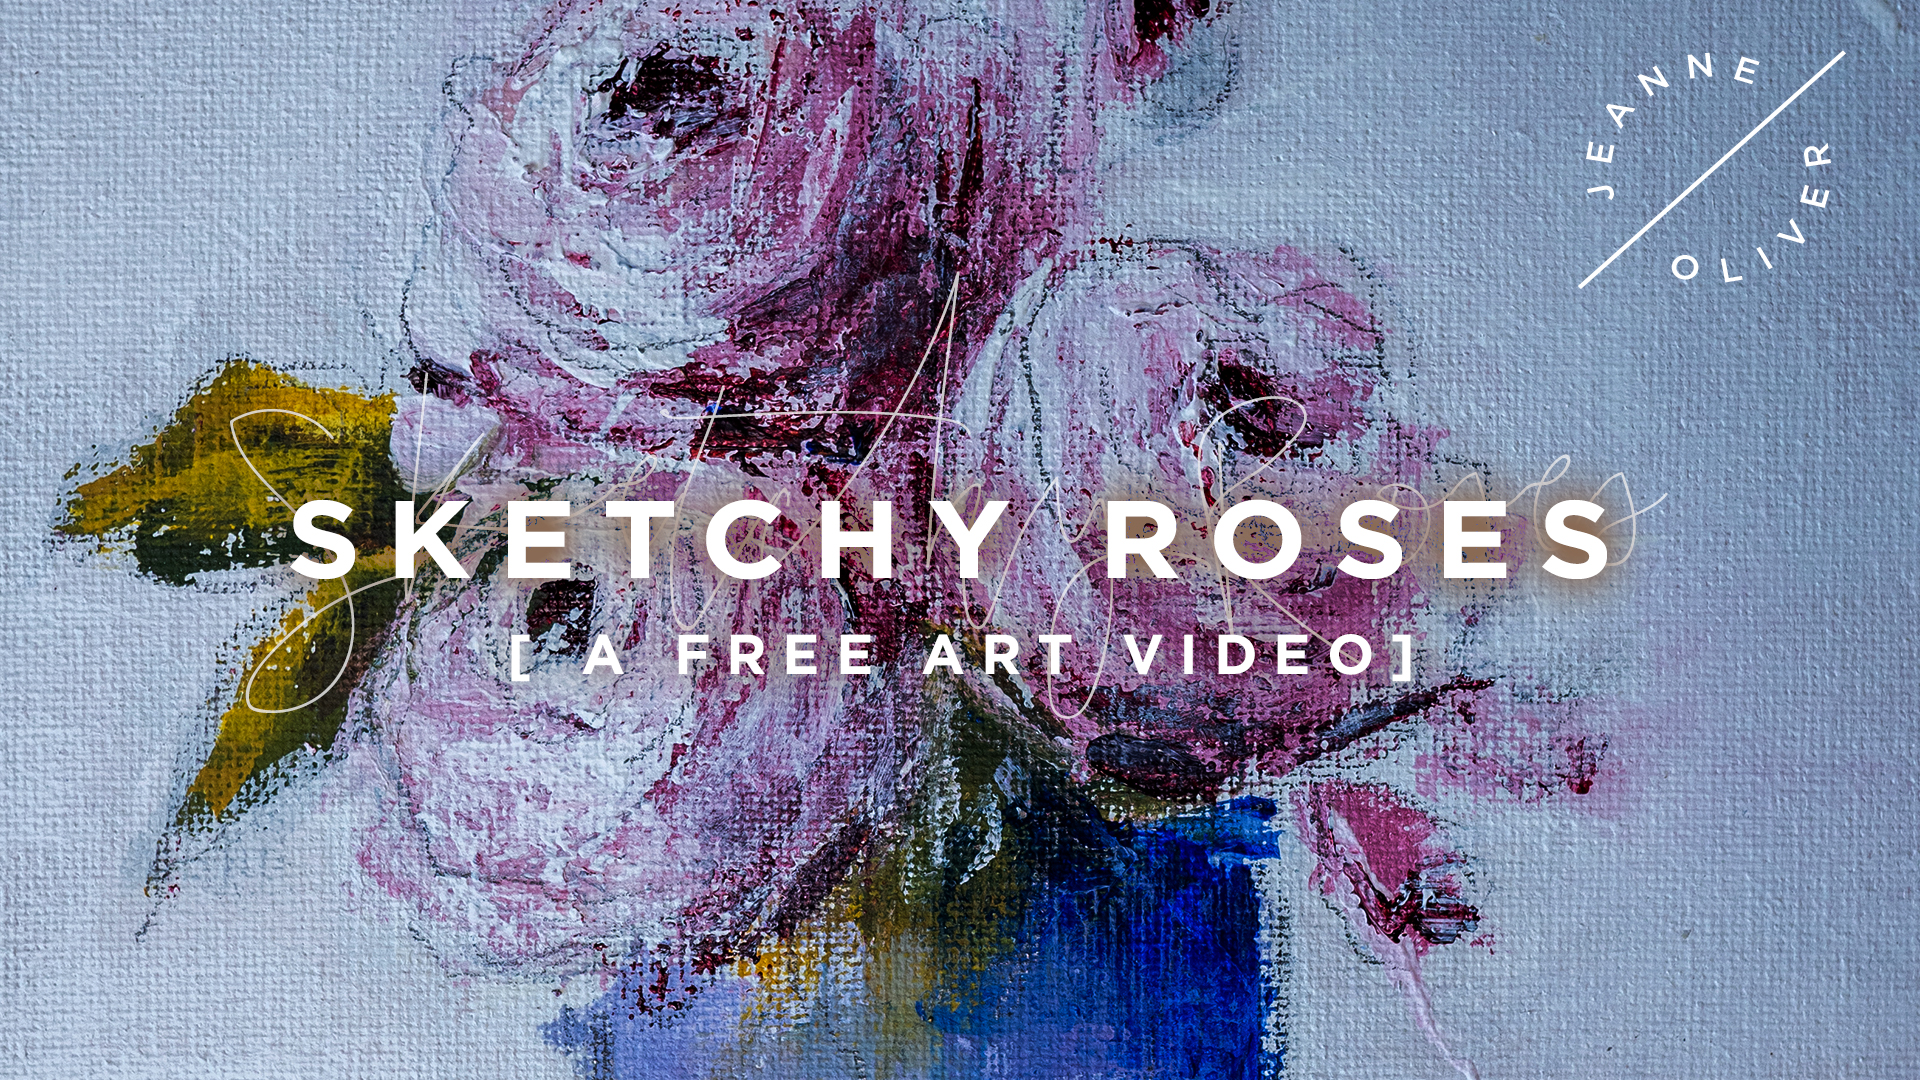 Free Art Video | Sketchy Roses with Mary Gregory